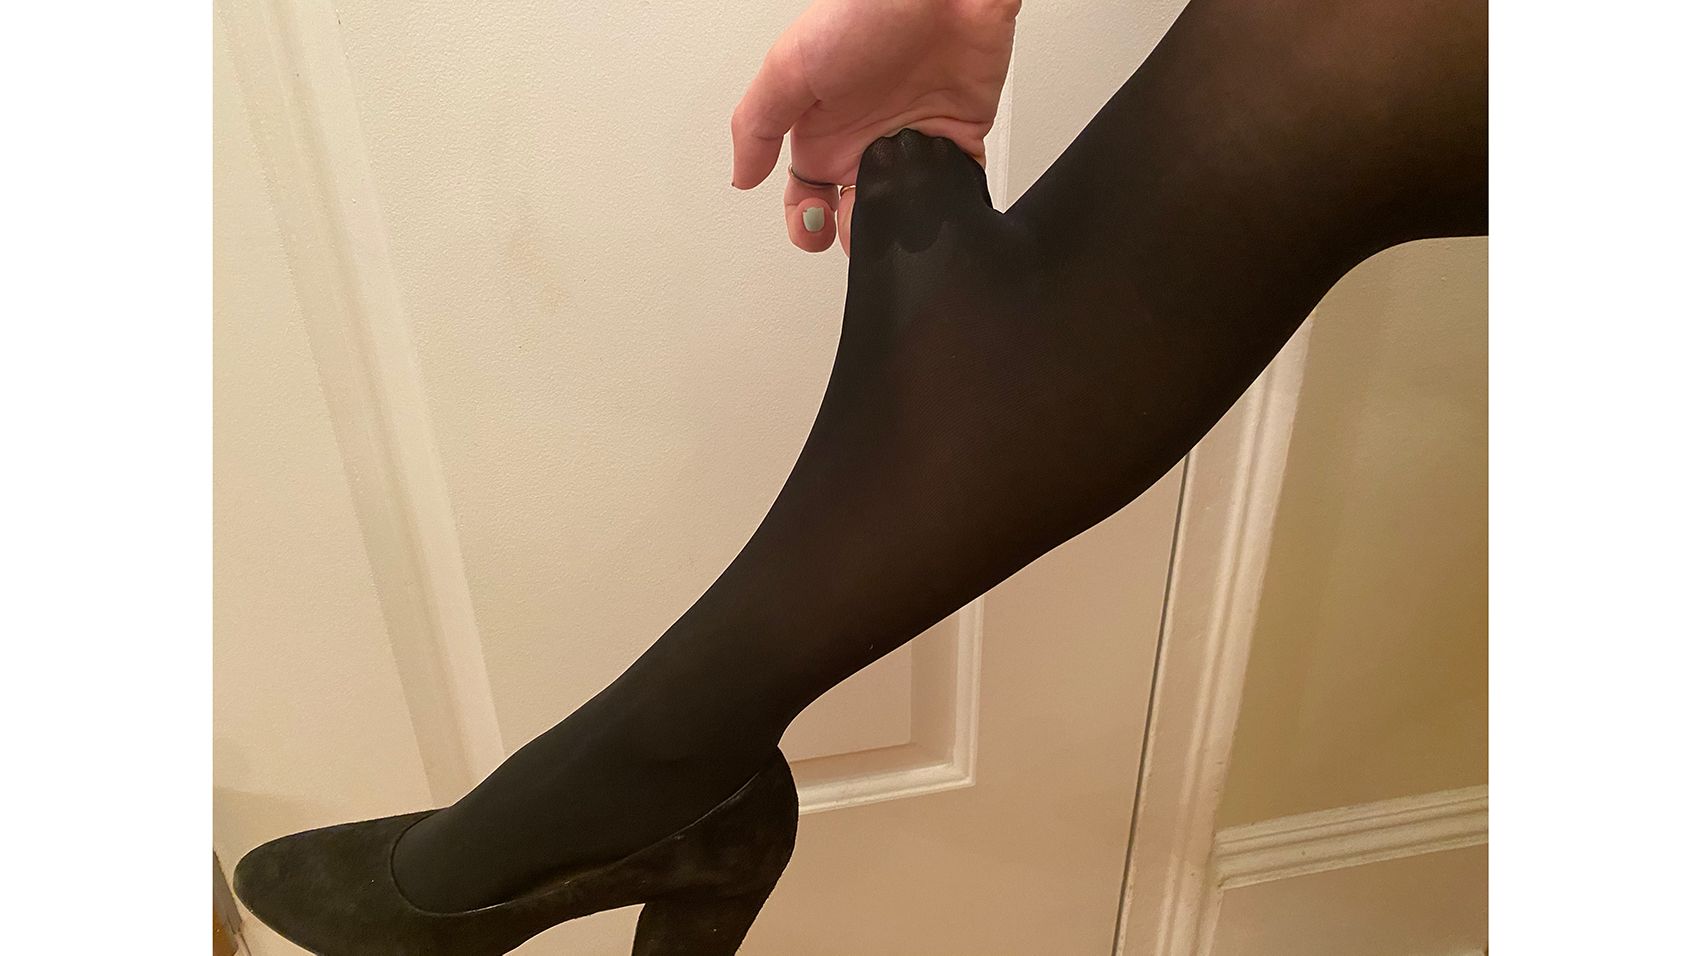 Sheertex Review: I Tried The Unbreakable Tights To See If They Really  Were No-Rip Quality - MTL Blog